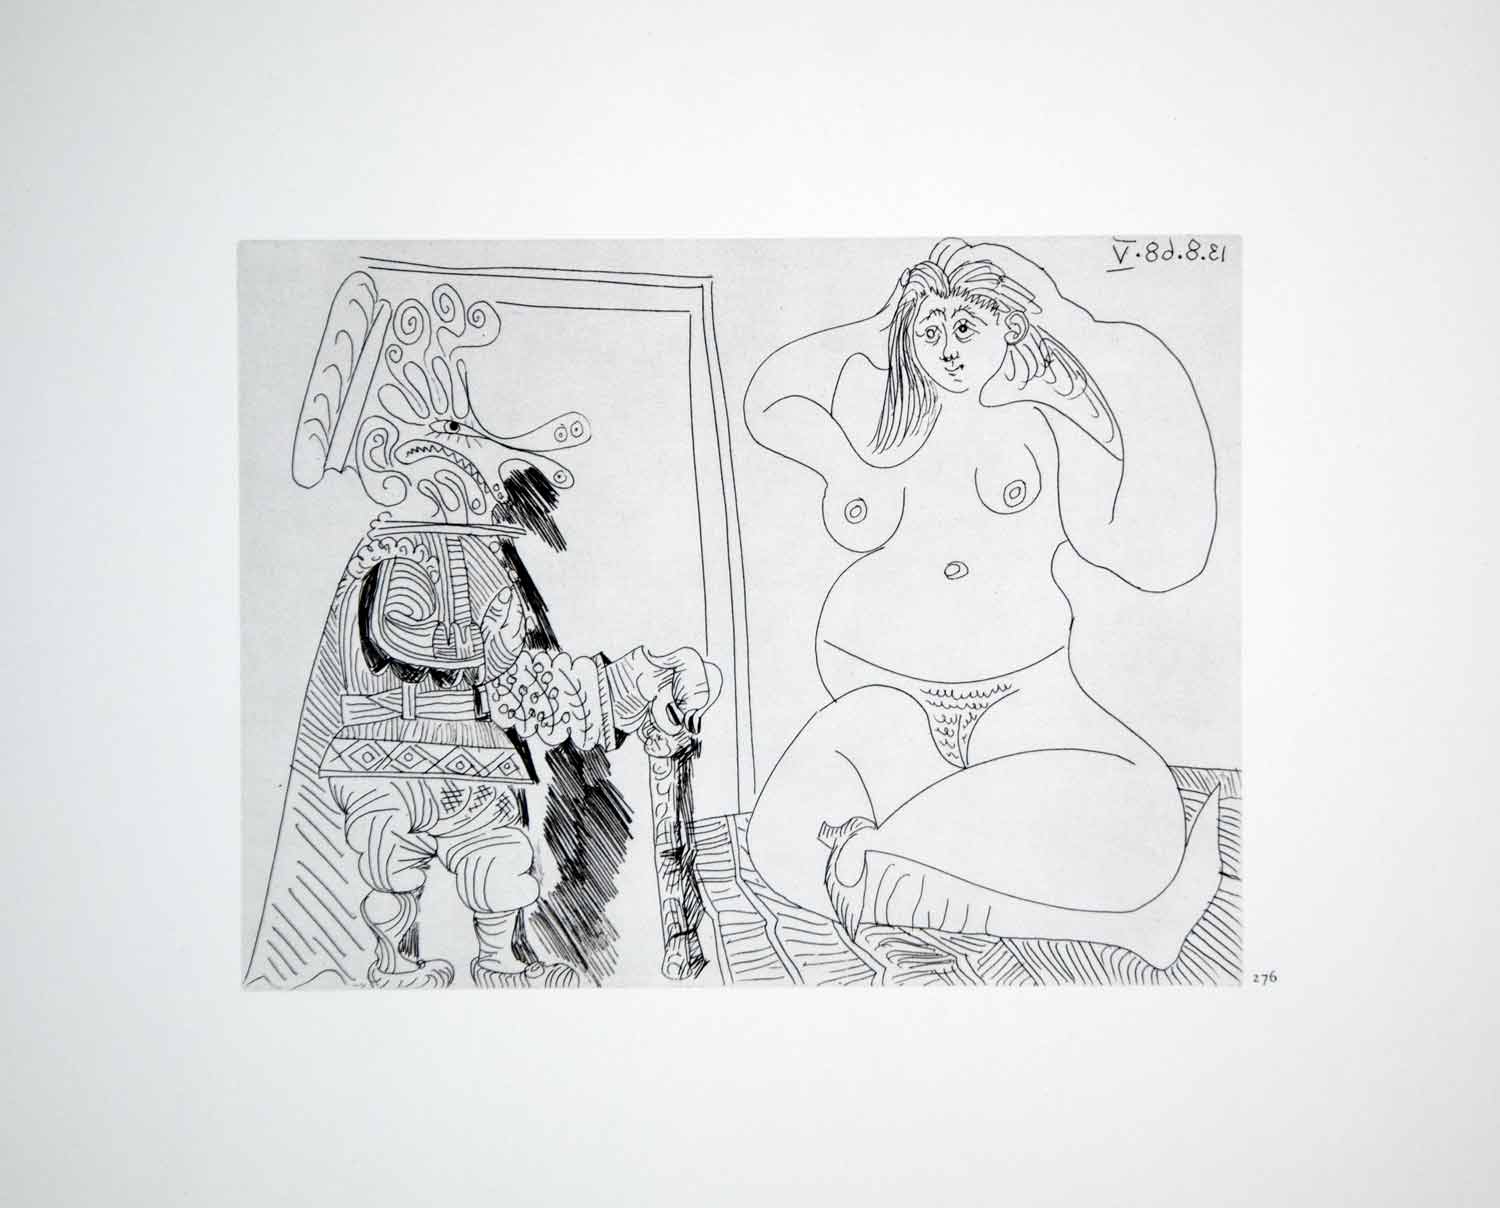 1970 Heliogravure Picasso Seated Nude Art Female Figure Musketeer Etching P347B